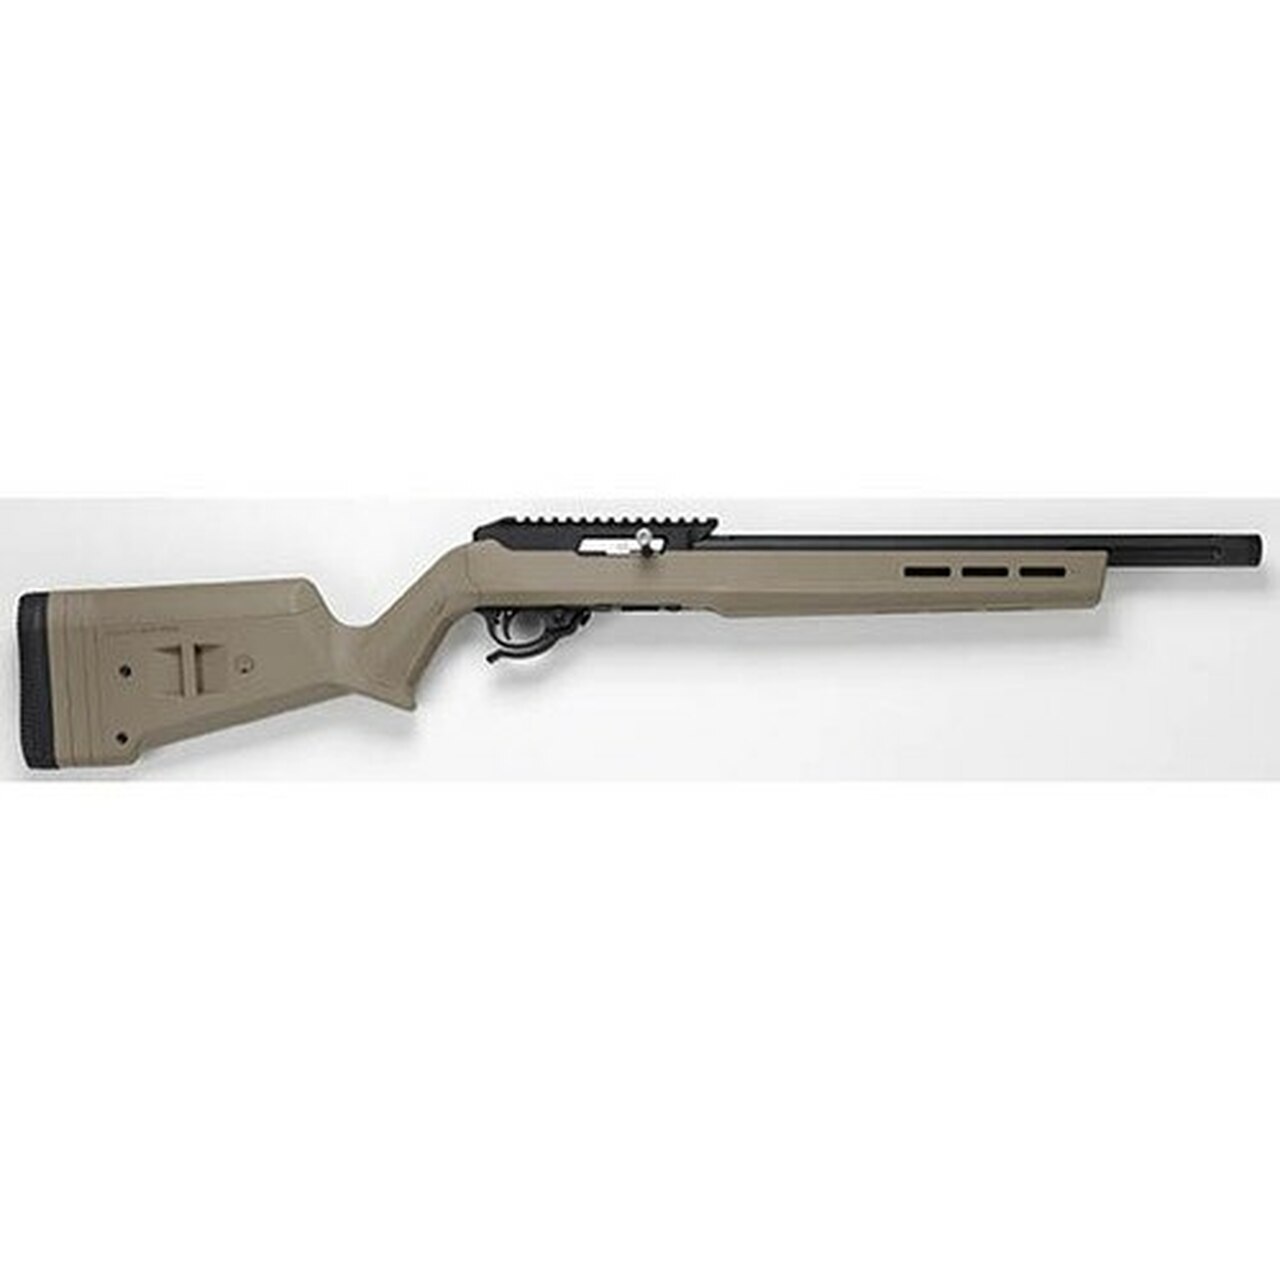 Image of Tactical Solutions X-Ring VR 22 LR, Magpul Hunter X-22 Stock, Matte Black Barreled Action, Flat Dark Earth Stock